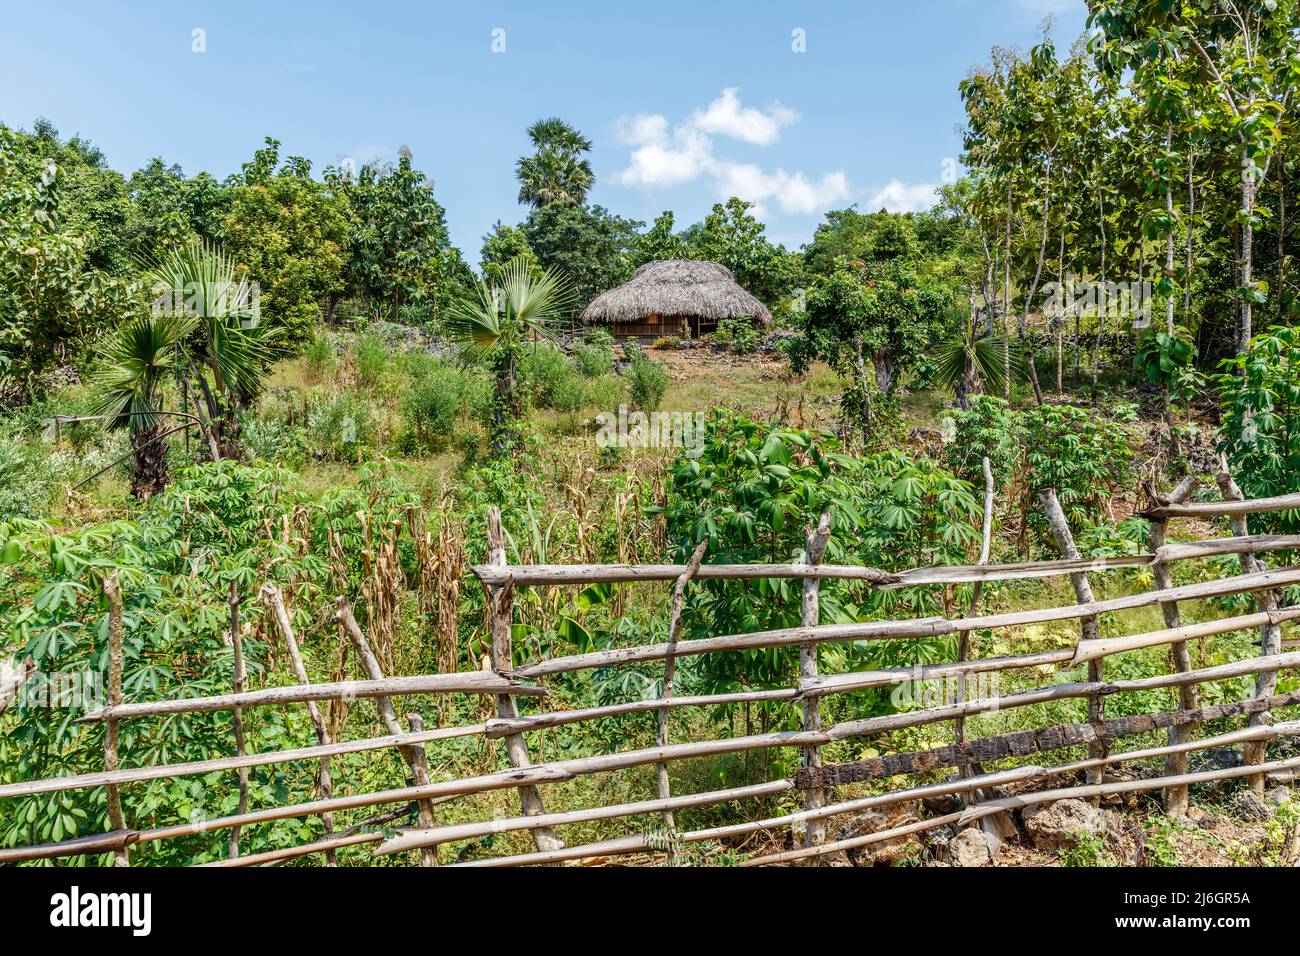 Rotenese village. Traditional house with thatched roof and bamboo fence, surrounded by trees. Rote Island, East Nusa Tenggara province, Indonesia Stock Photo